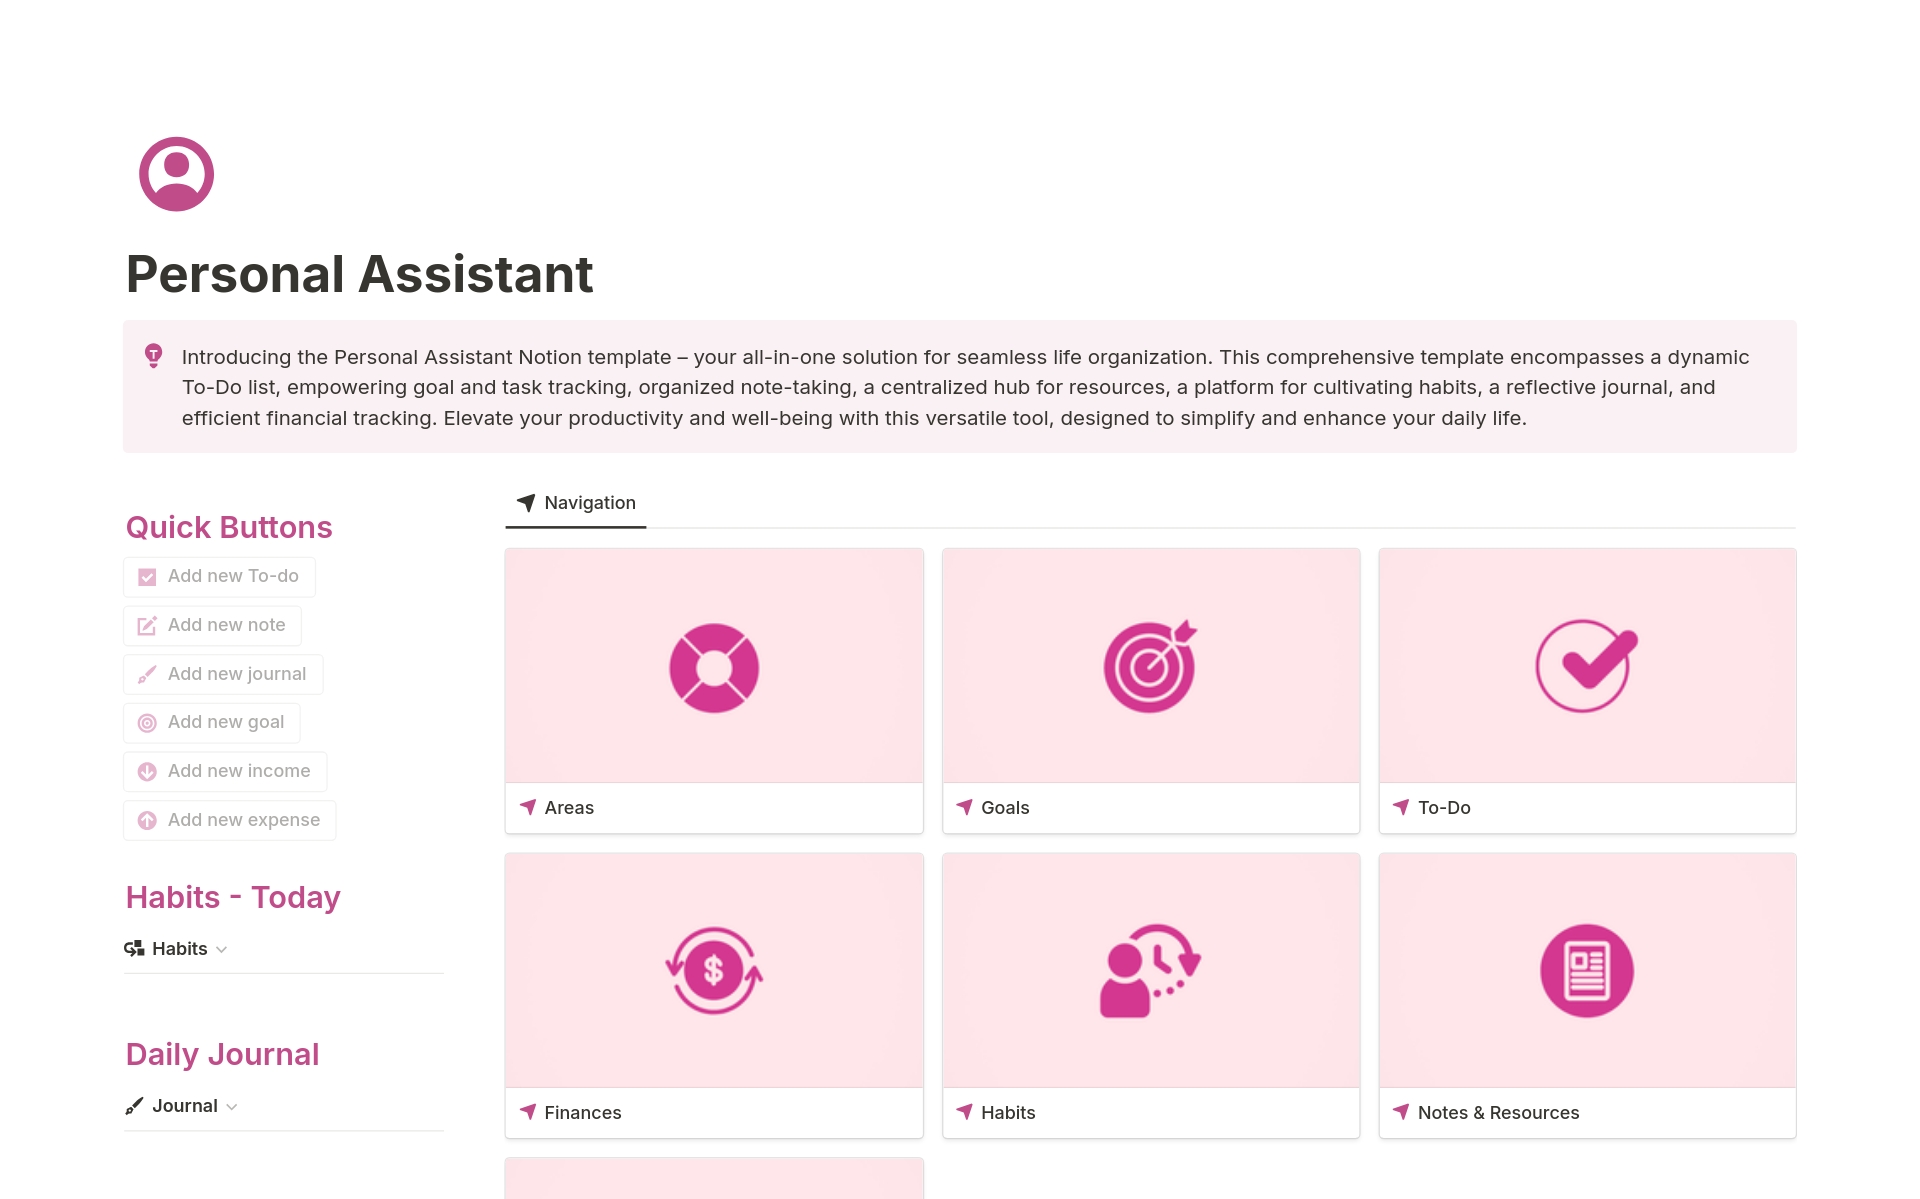 Introducing the Personal Assistant Notion template – your all-in-one solution for seamless life organization.